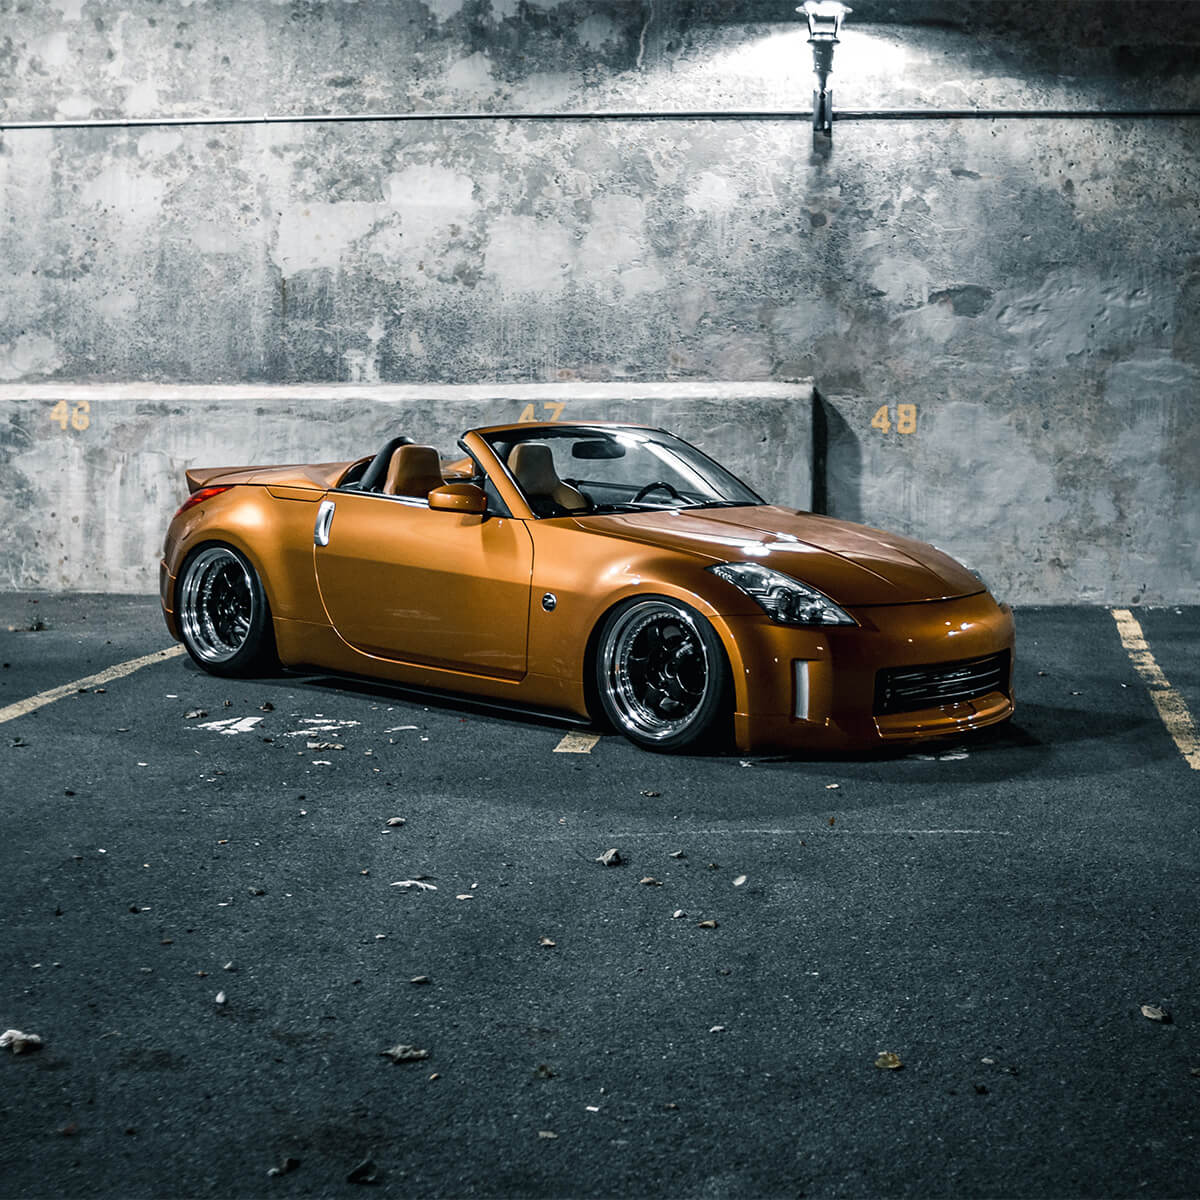 Nissan 350z convertible with a lowered suspension and custom wheels